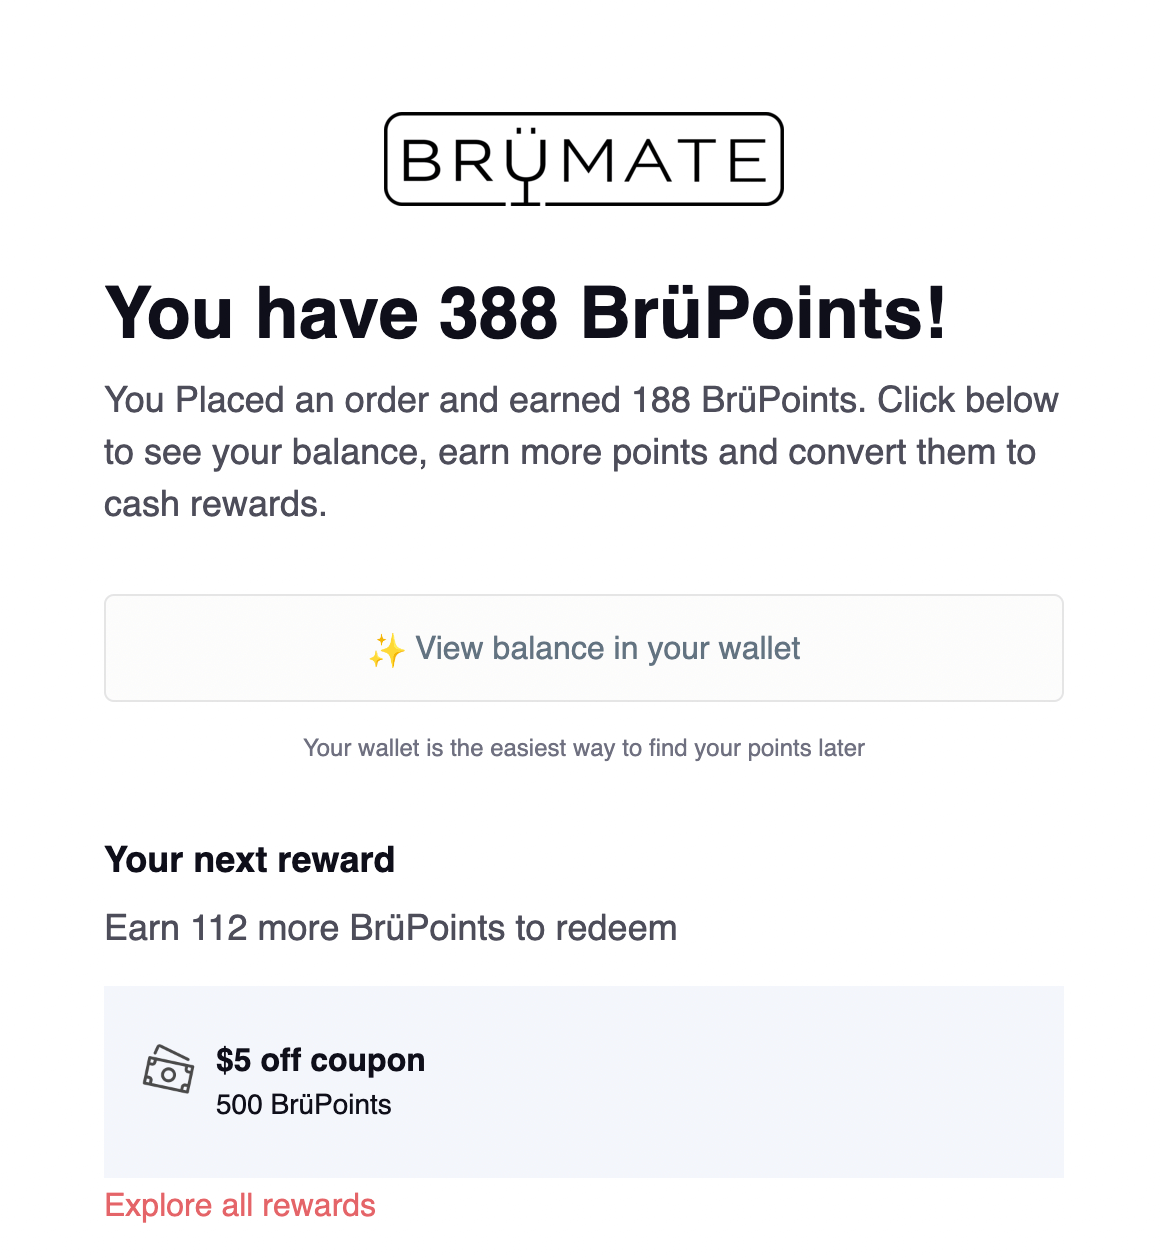 post purchase email - BrüMate loyalty points email 